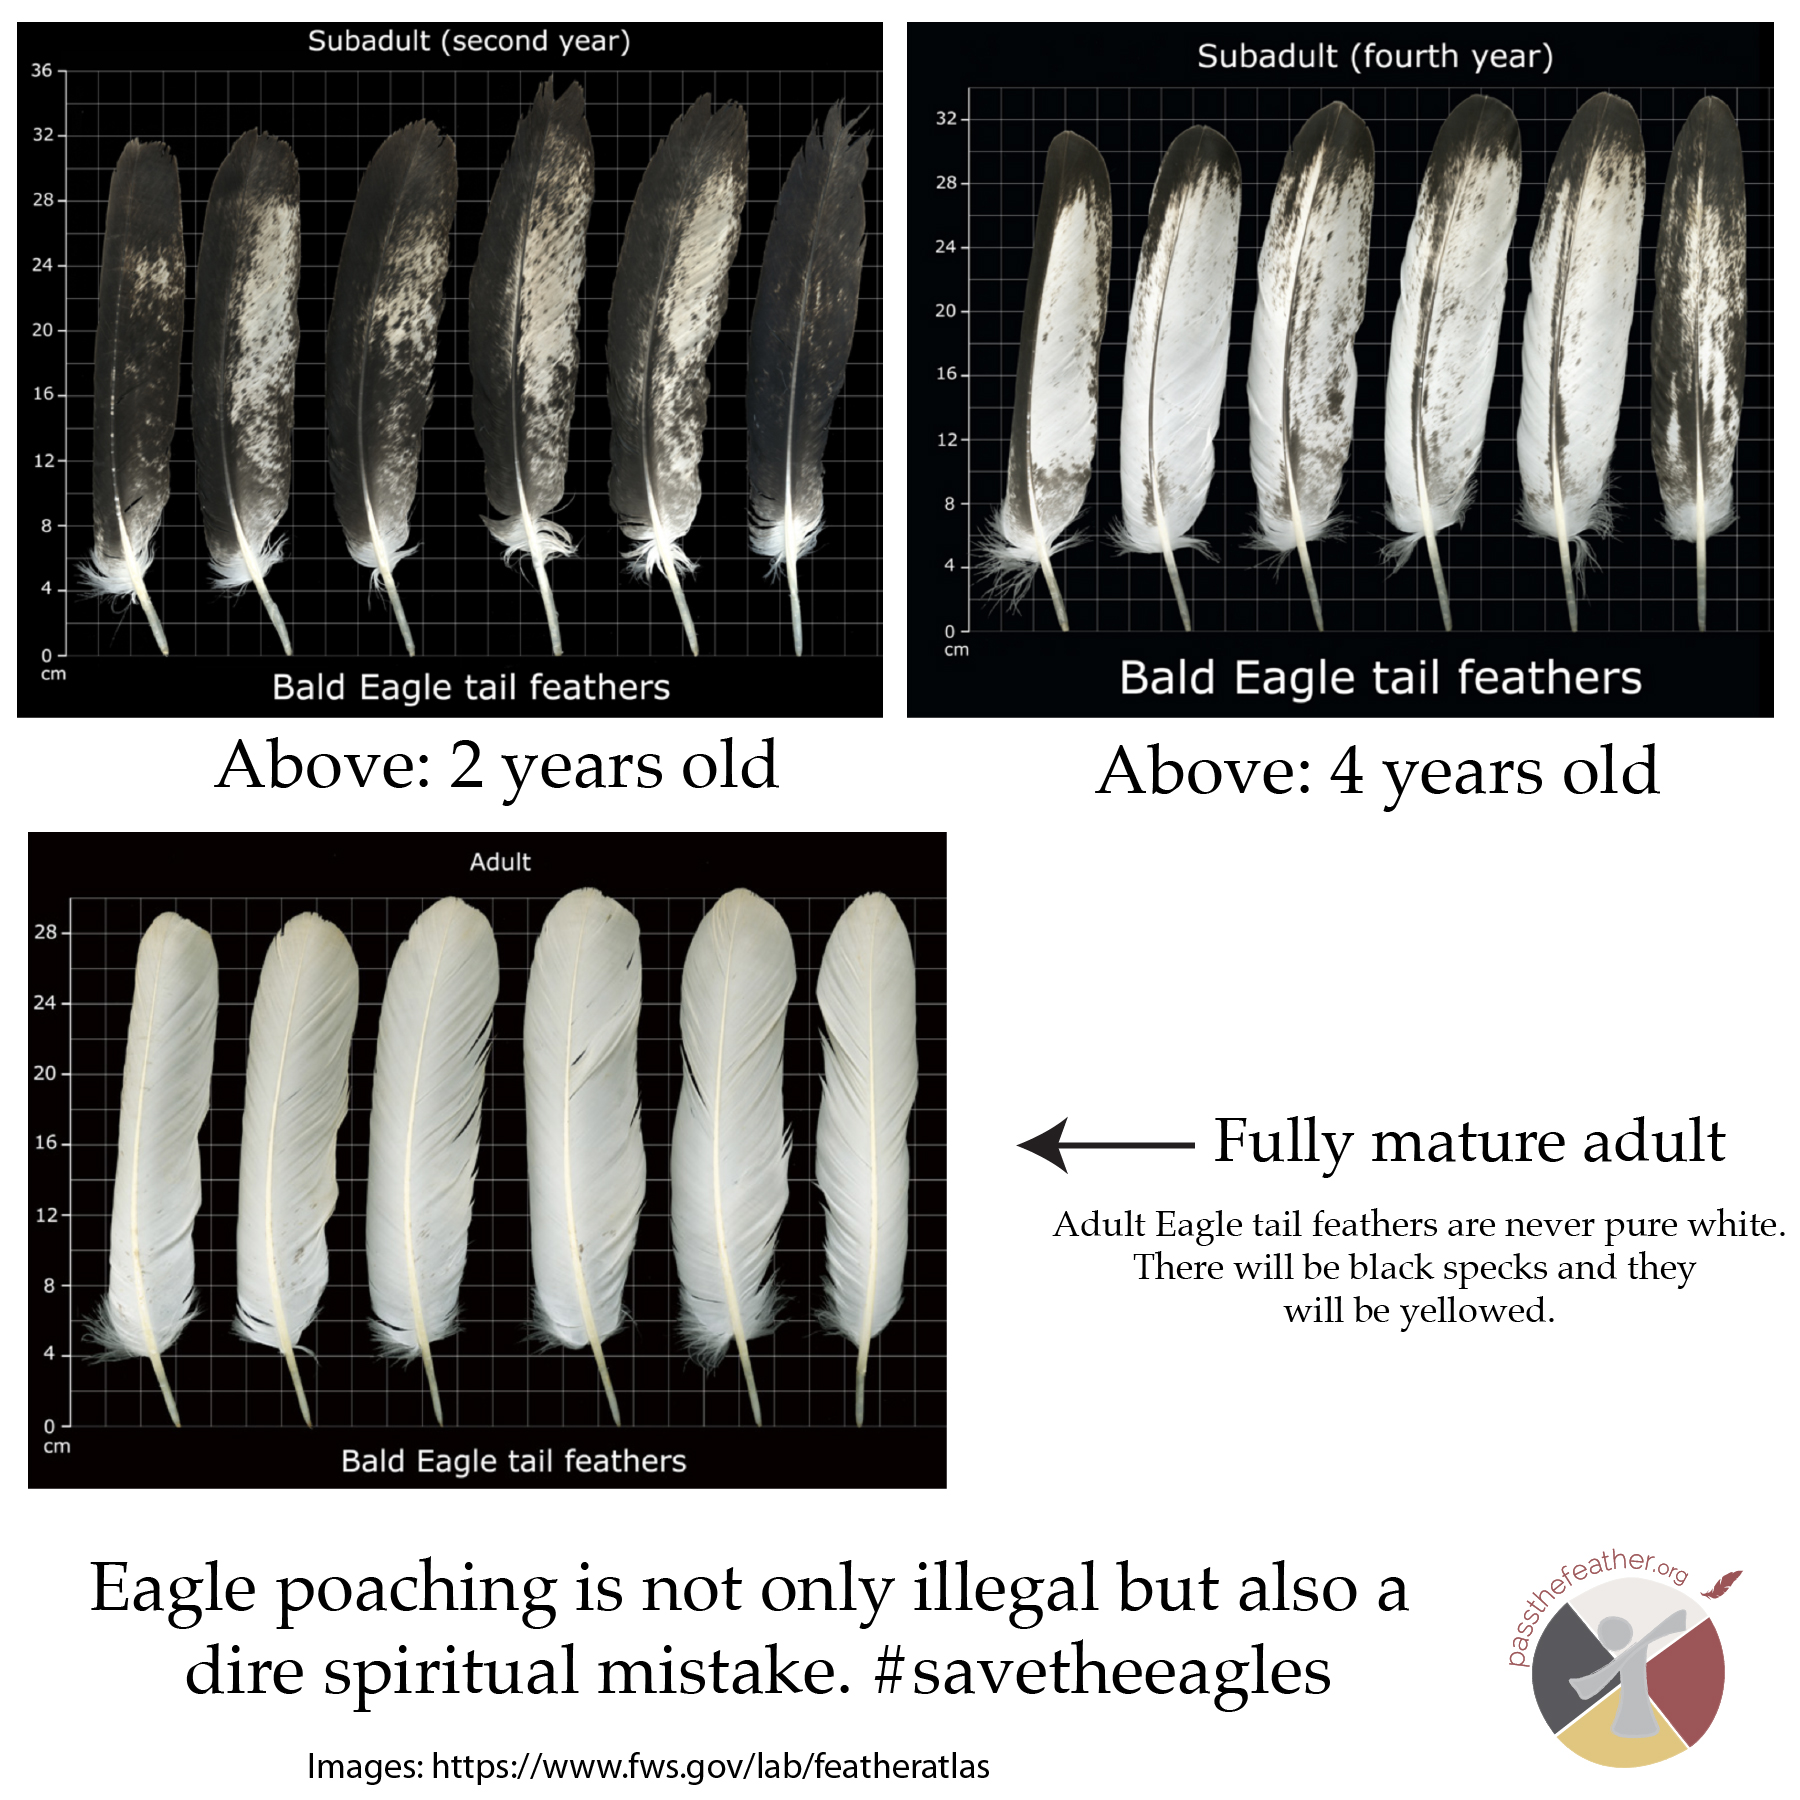 bald eagle, feathers, pass the feather, feather identification, the feather atlas